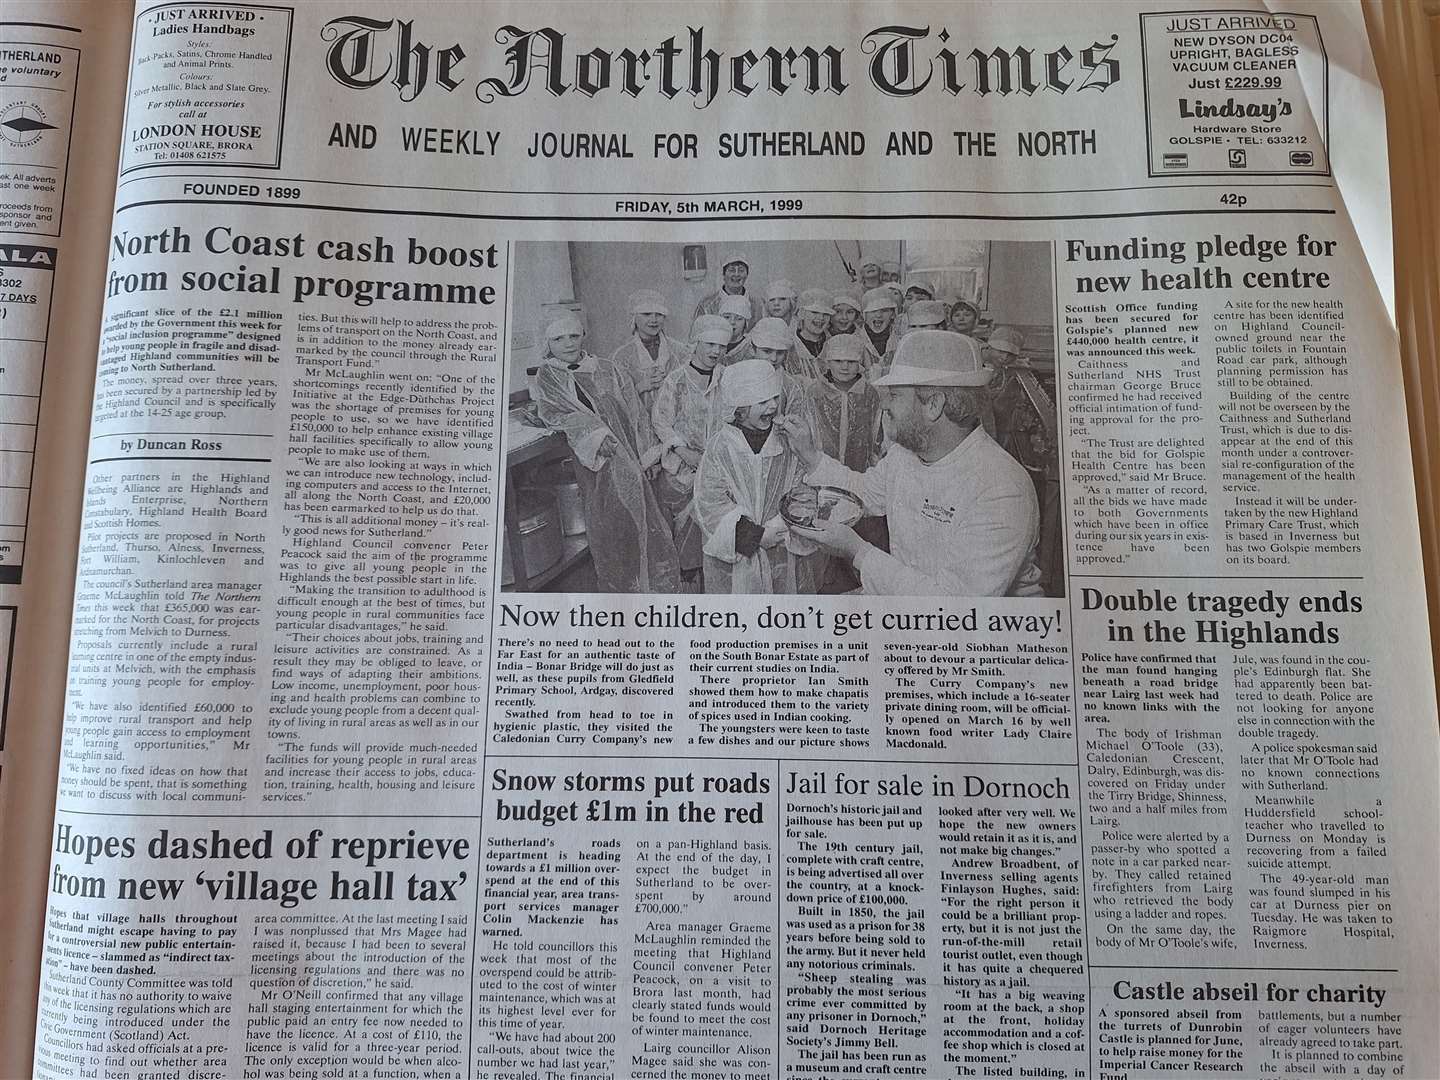 The edition of March 5, 1999.